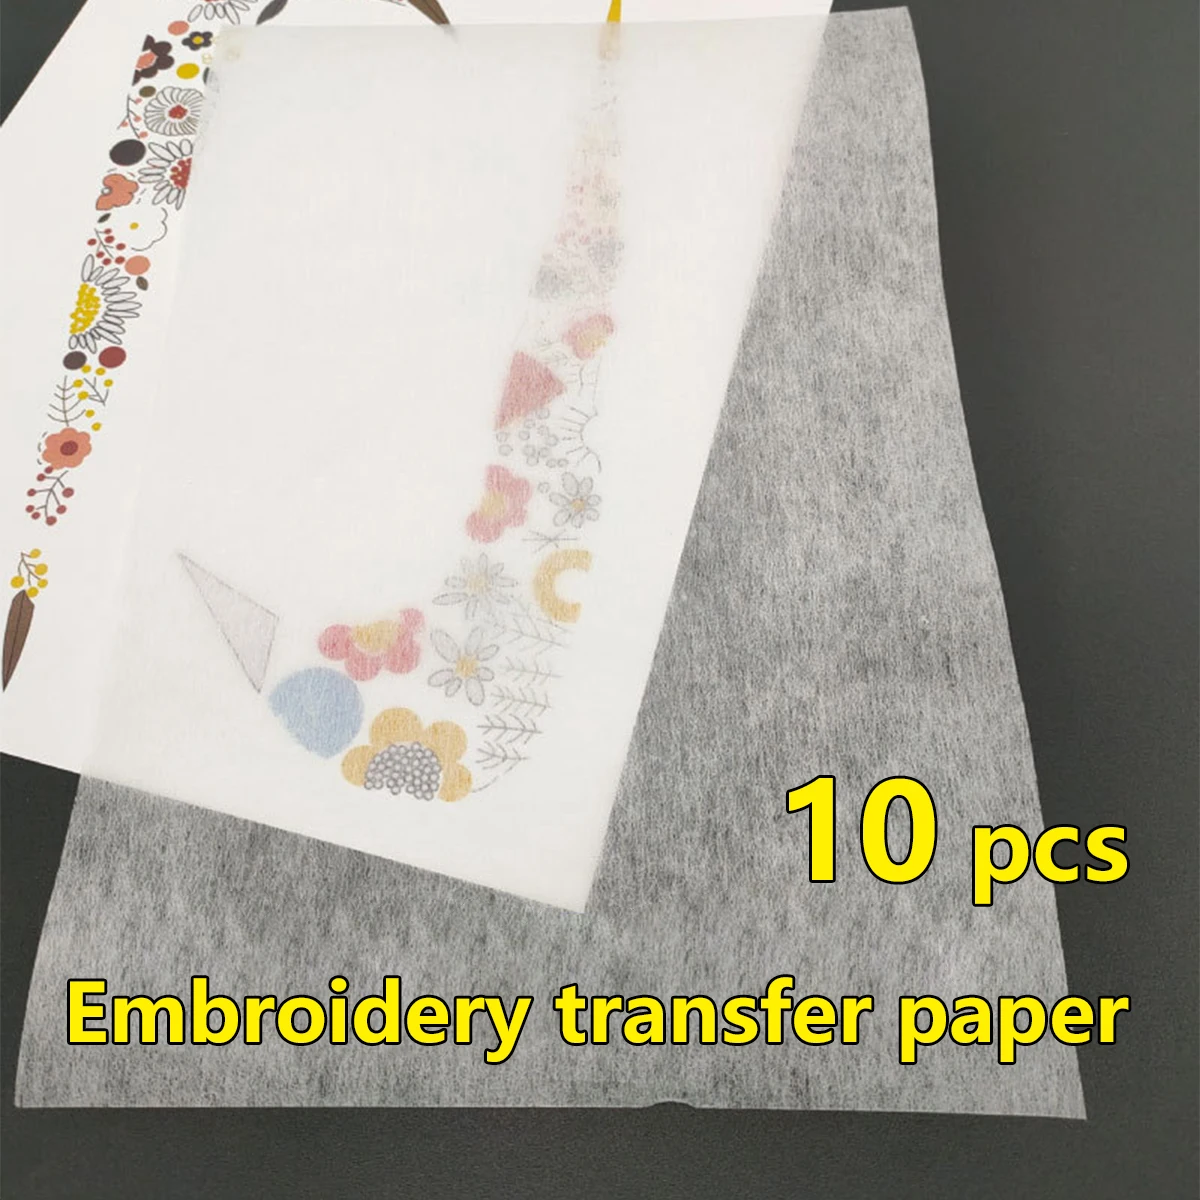 10pcs/set Embroidery Transfer Paper Film DIY Handmade Embroidery Tracing Pattern Hand Sew Craft Making Supplies 20*28cm 50*50cm